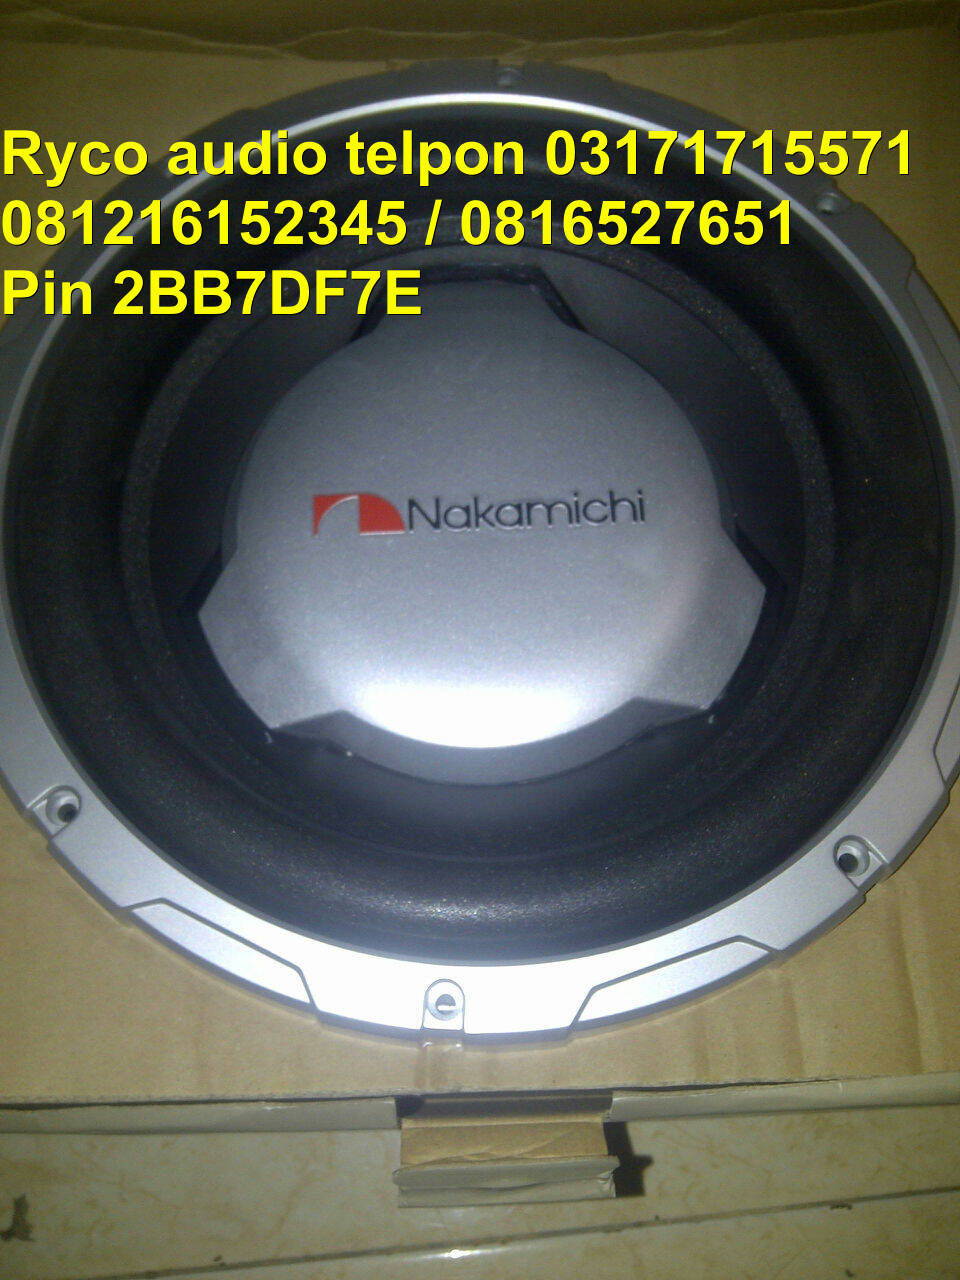 subwoofer 12inch double voice nakamichi sp-w120d for audio mobil 2/4/8 ohms